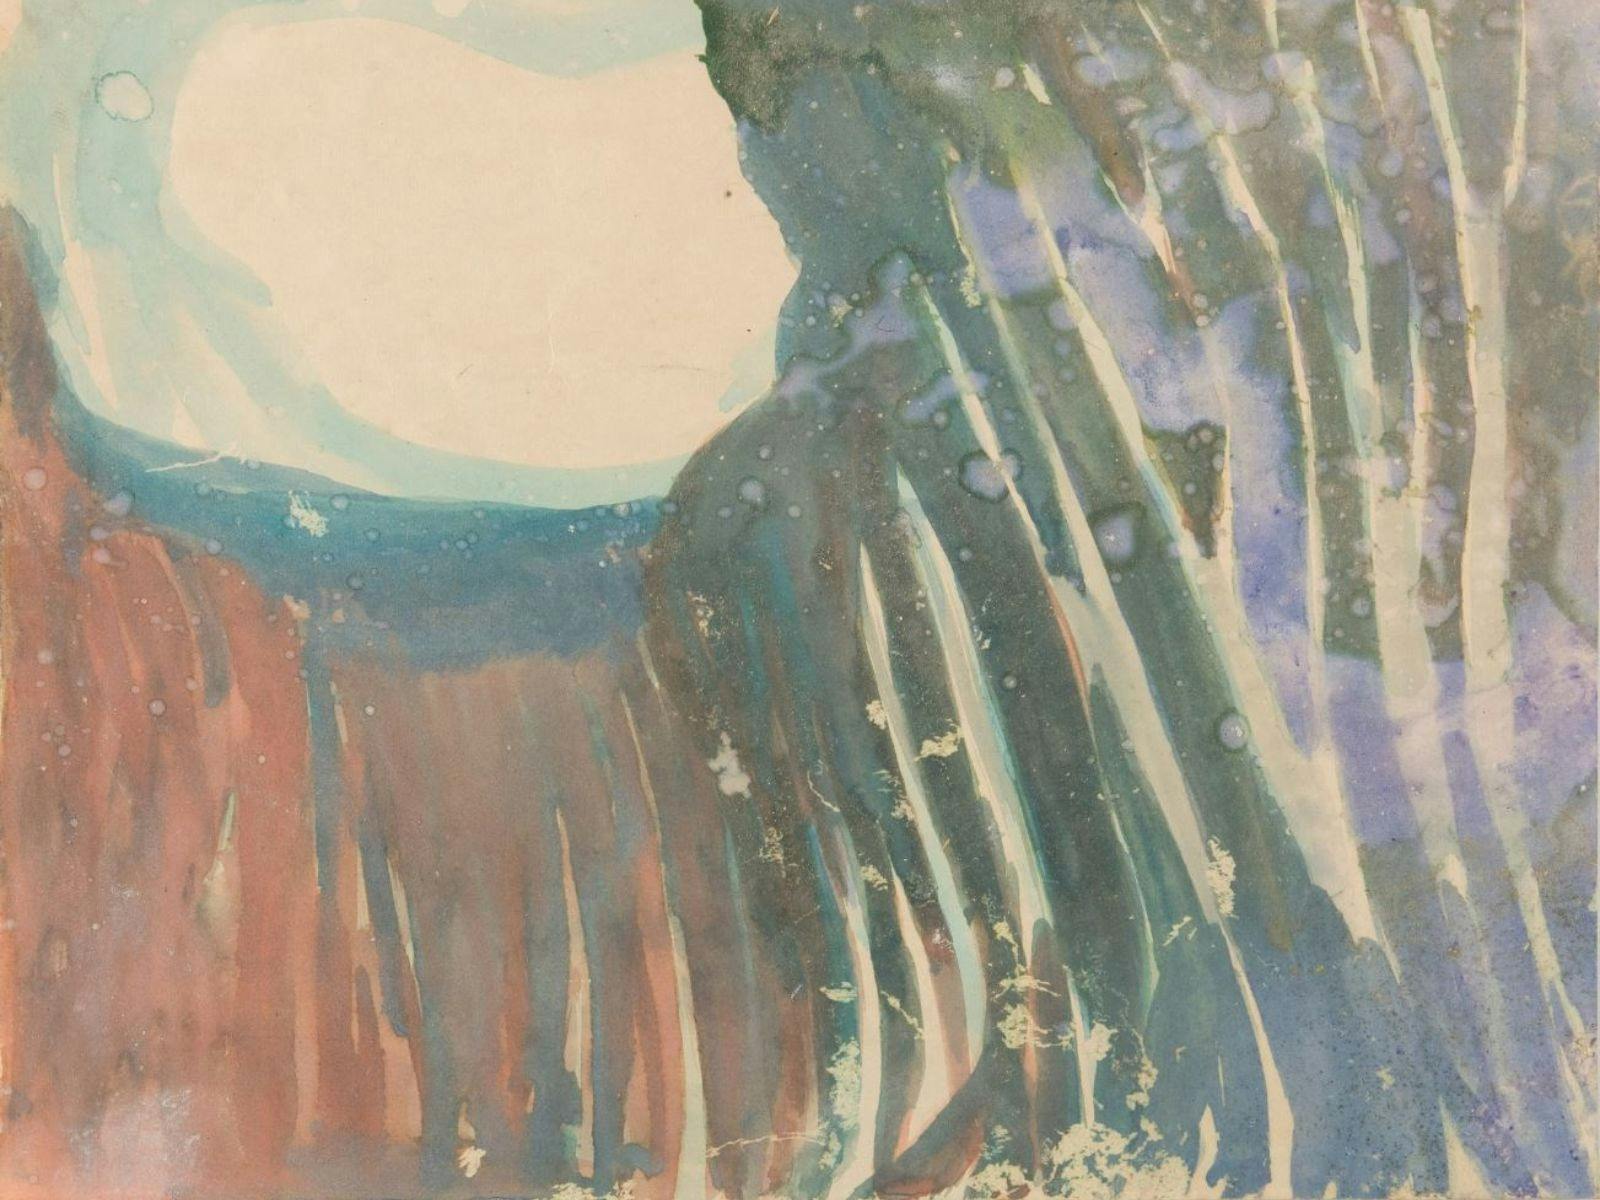 Merric Boyd, 'Trees', date unknown. Watercolour on paper